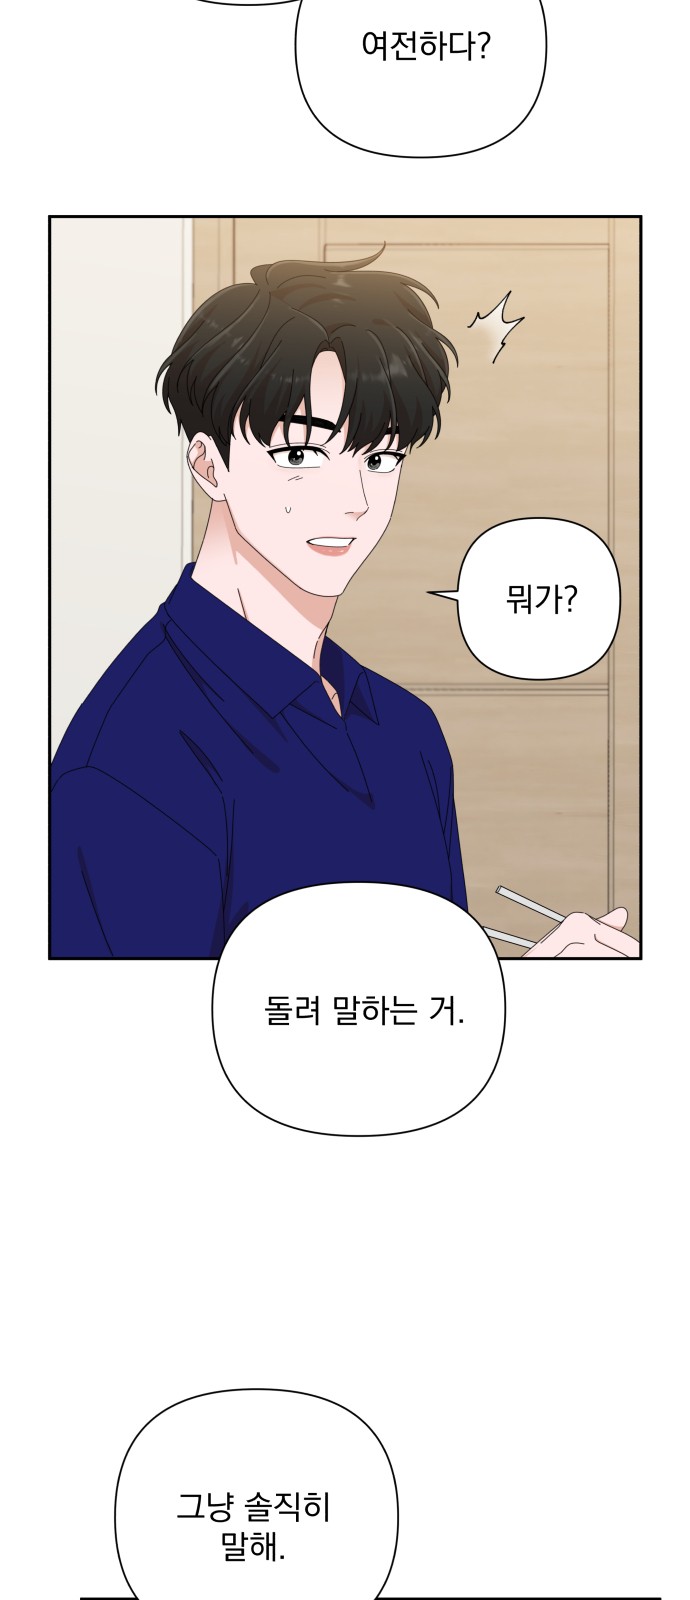 The Man With Pretty Lips - Chapter 31 - Page 2